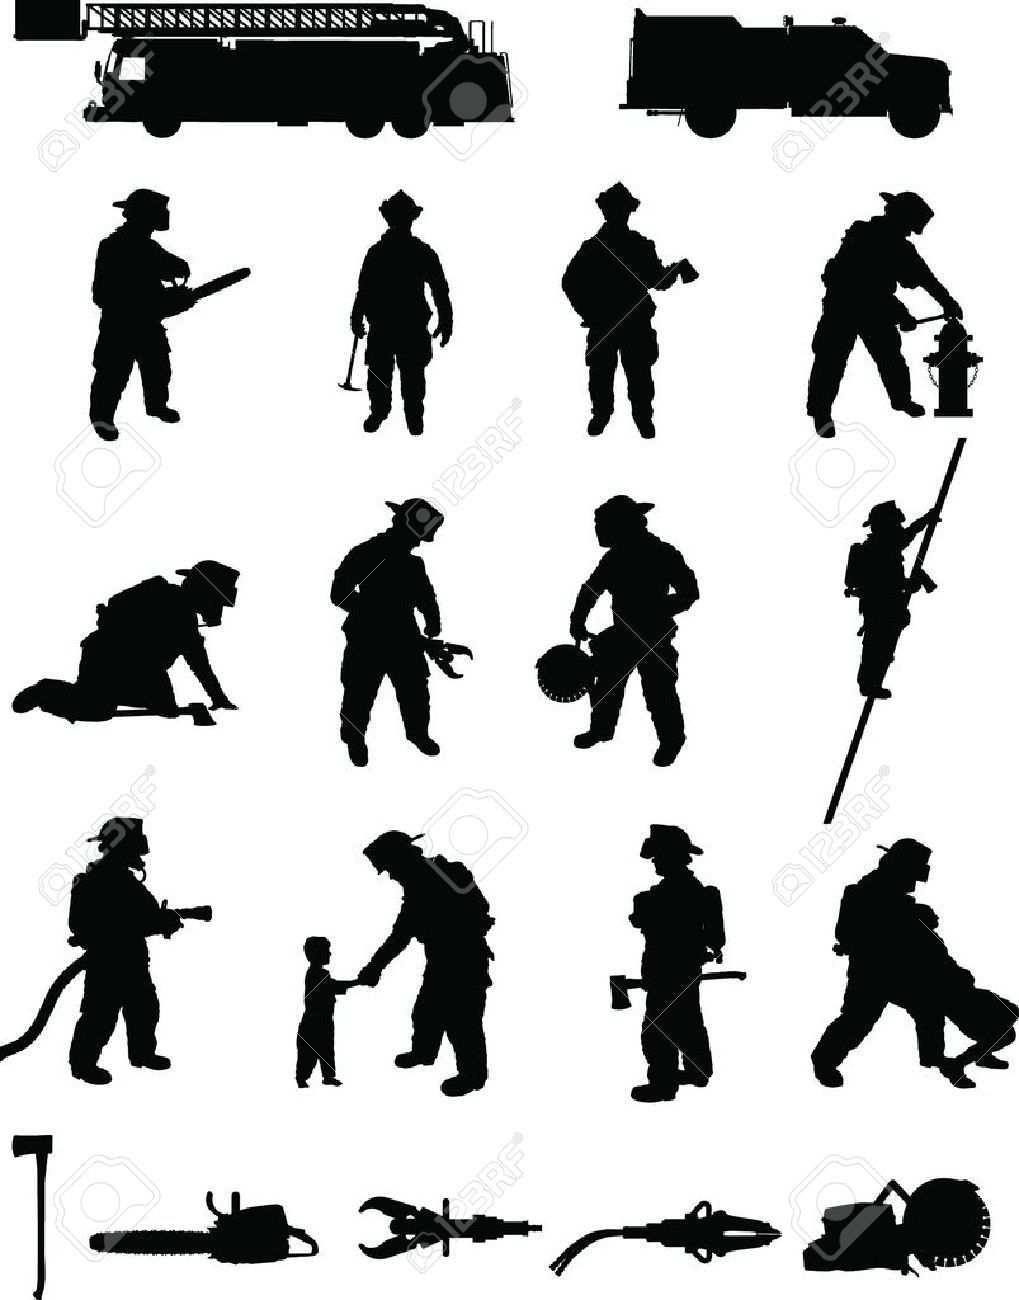 Image Result For Firefighter Silhouette Feuerwehr Clipart Kunst